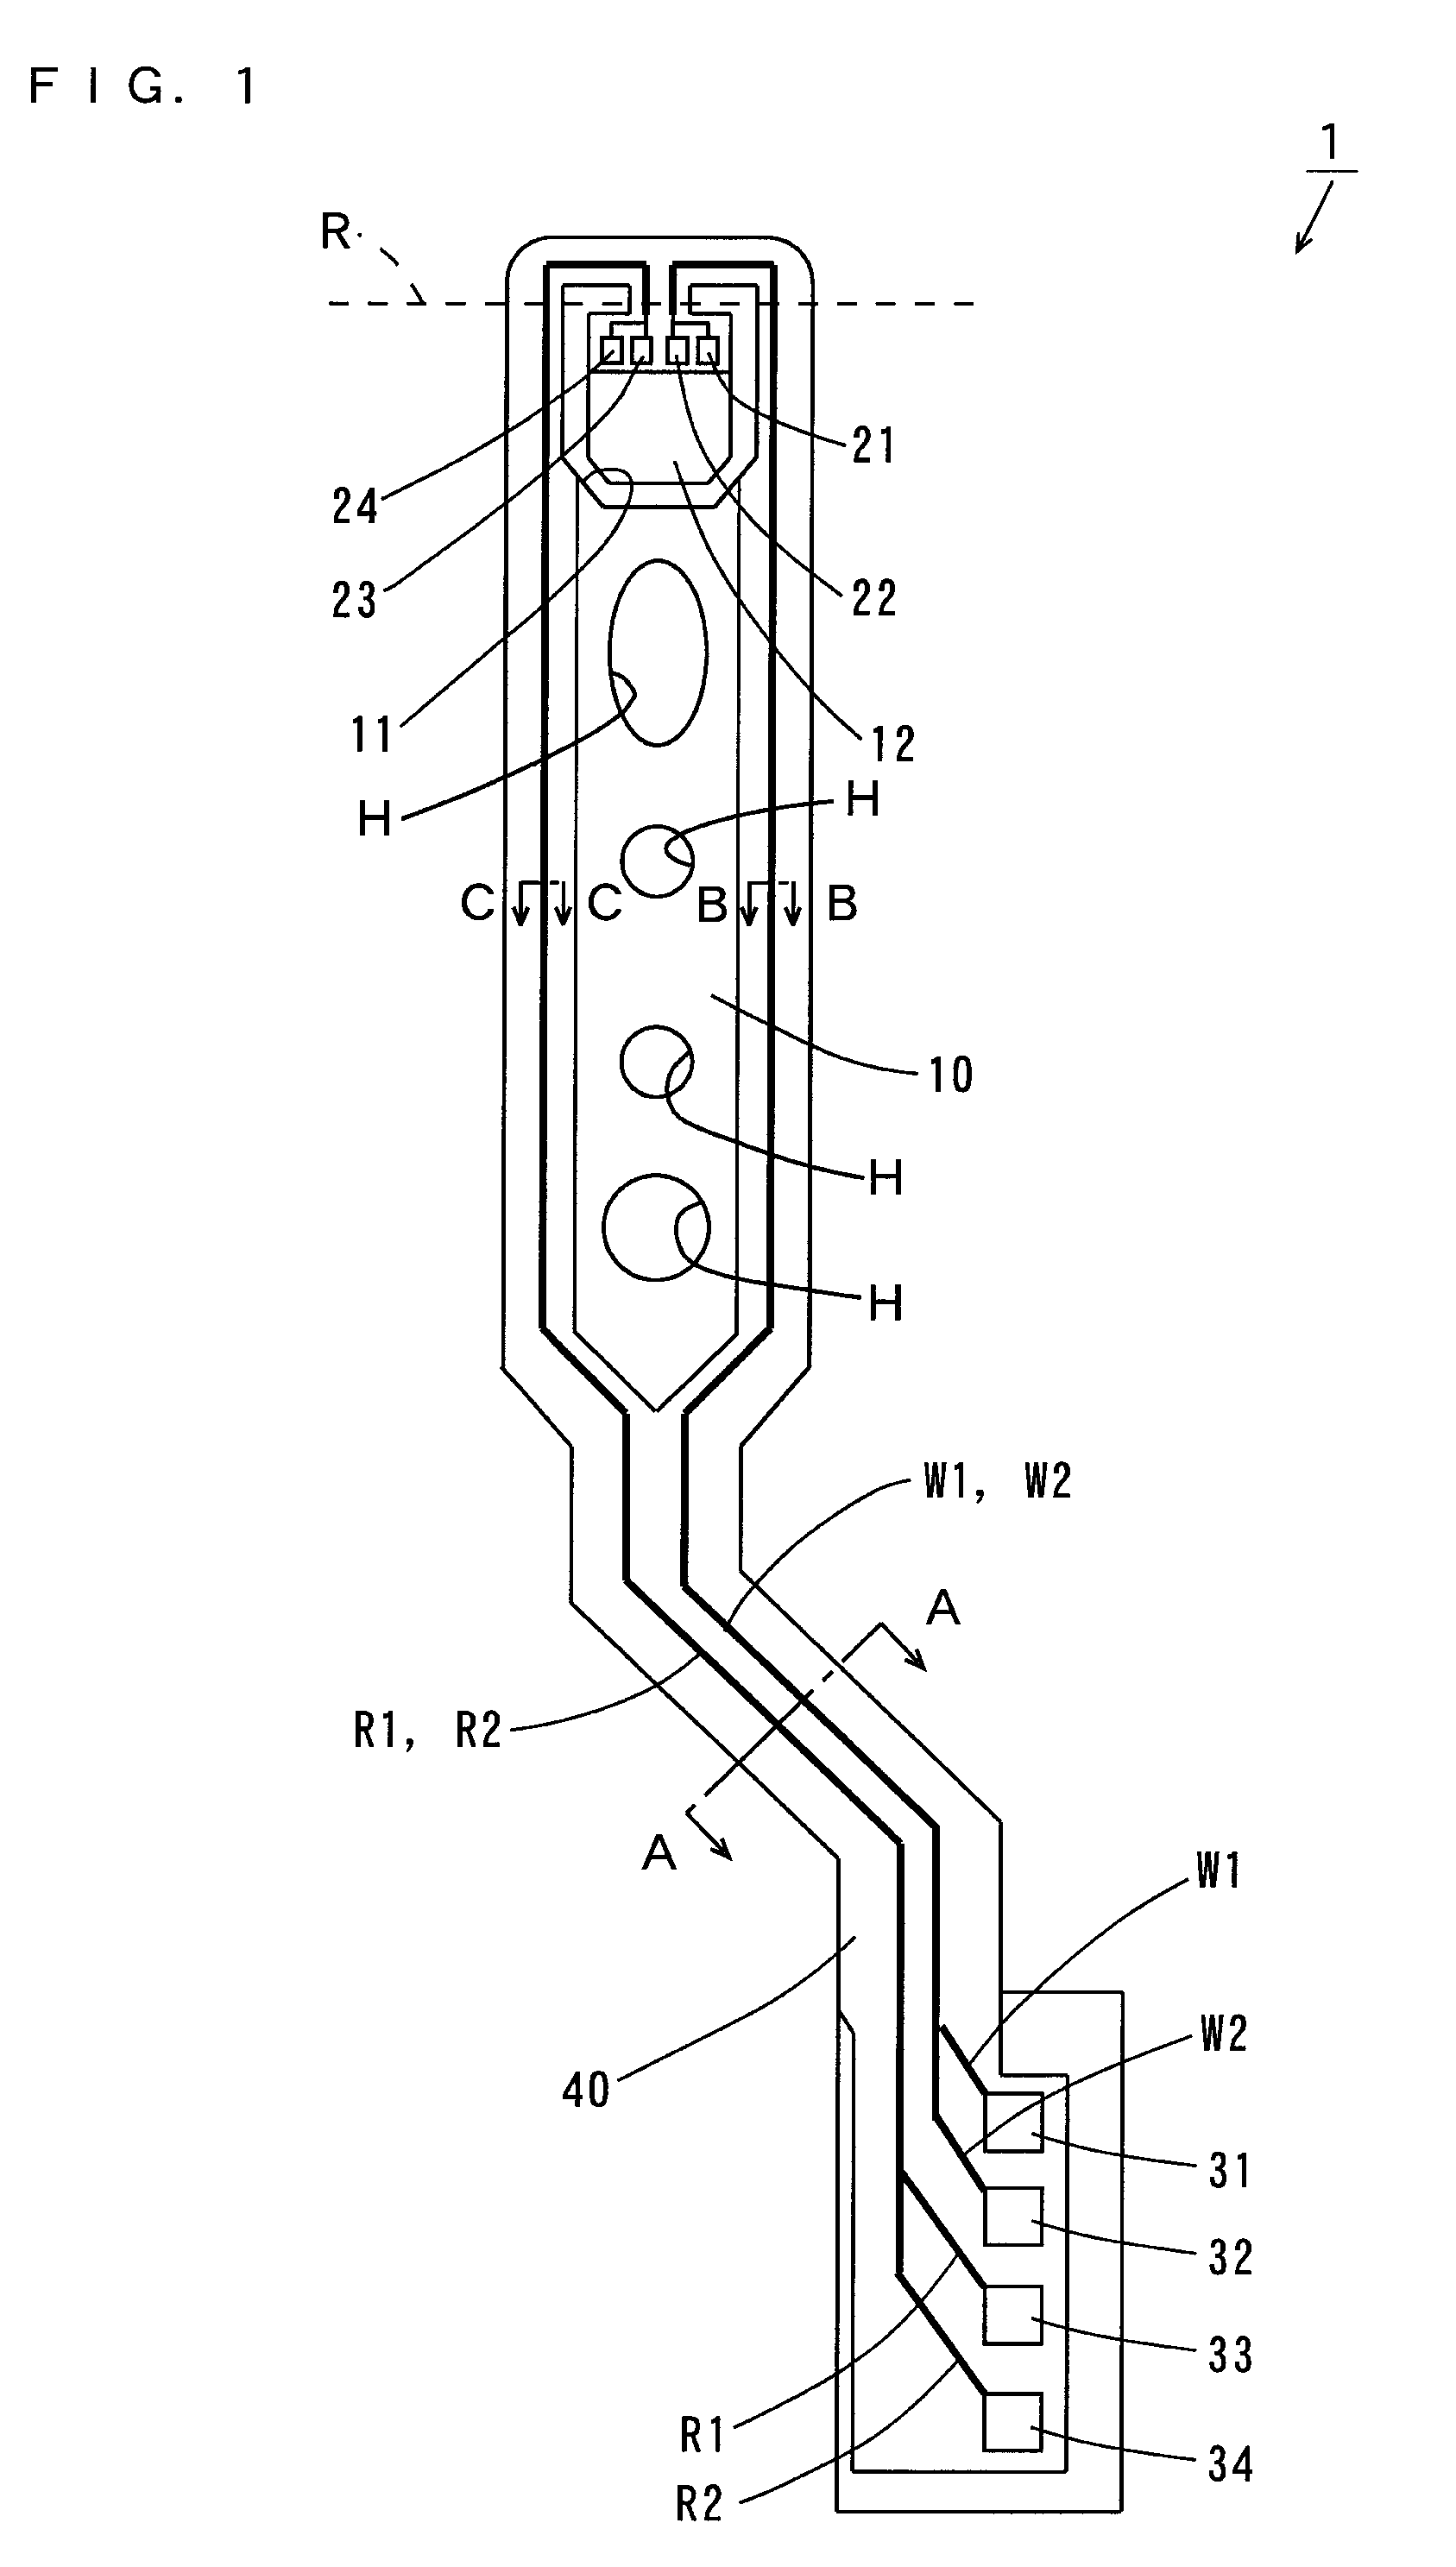 Multi-layered printed circuit board with a conductive substrate and three insulating layers with wiring and ground traces